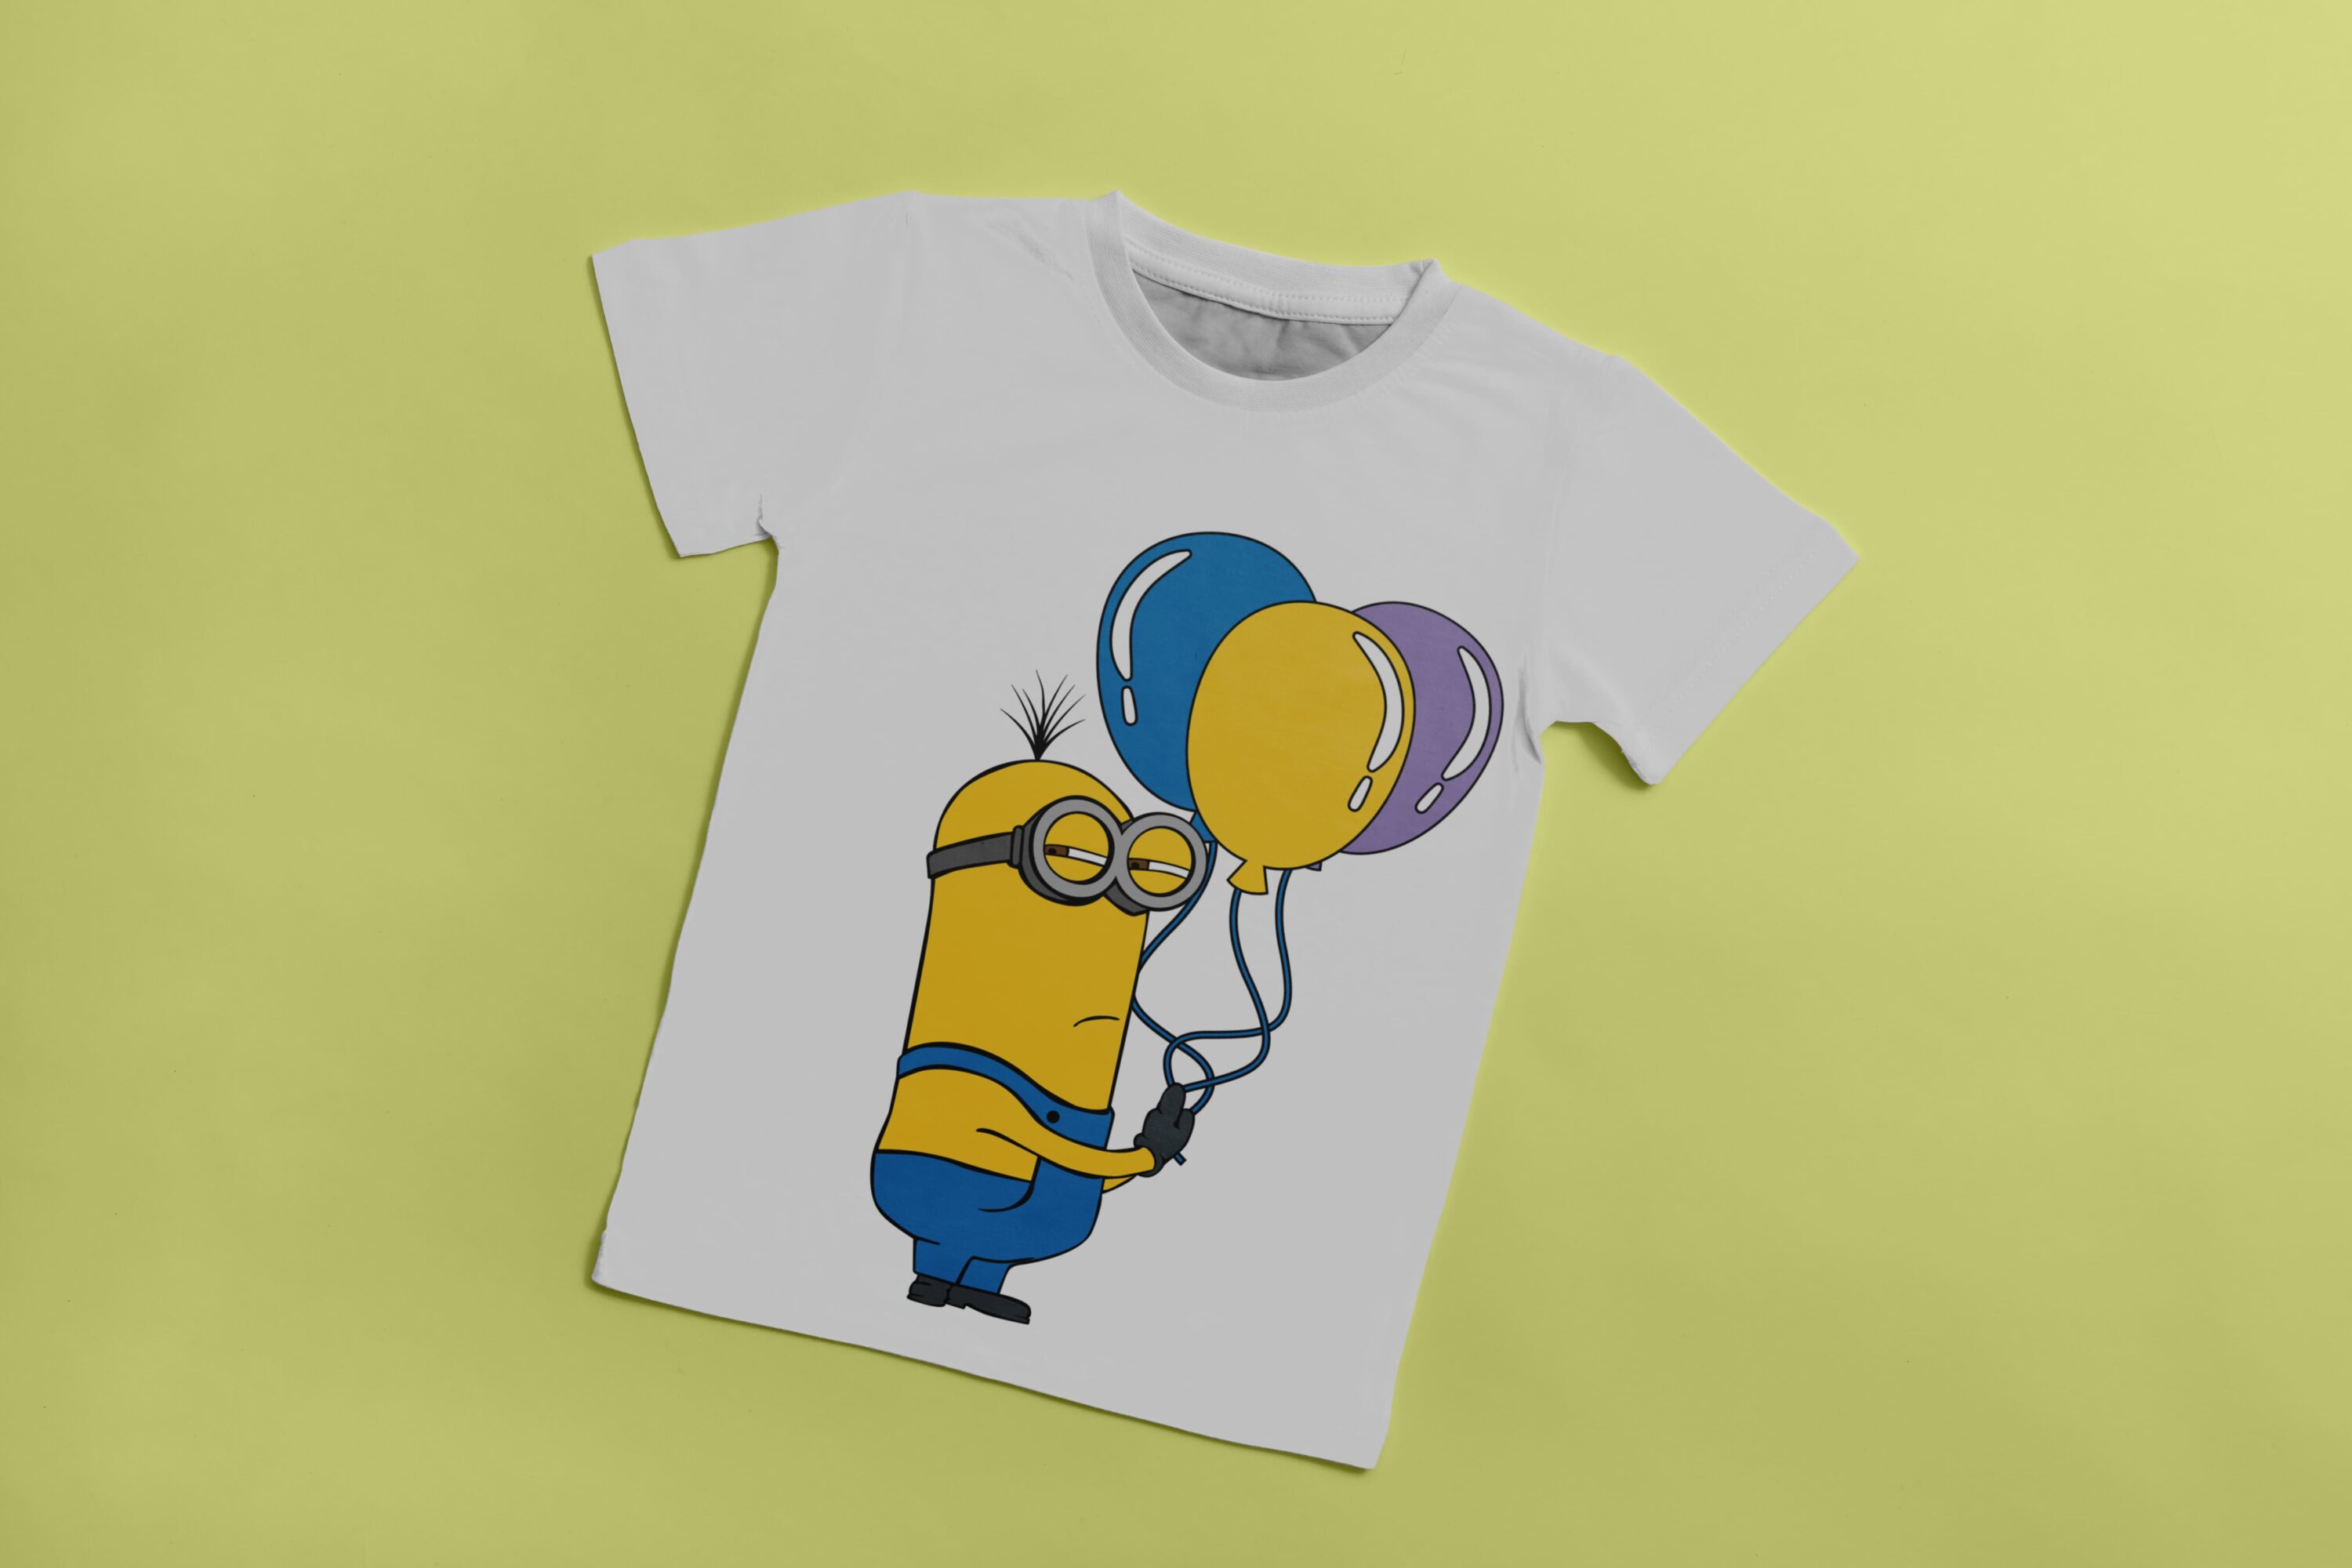 White T-shirt with the image of the offended Minion with blue, yellow and grey balloon.